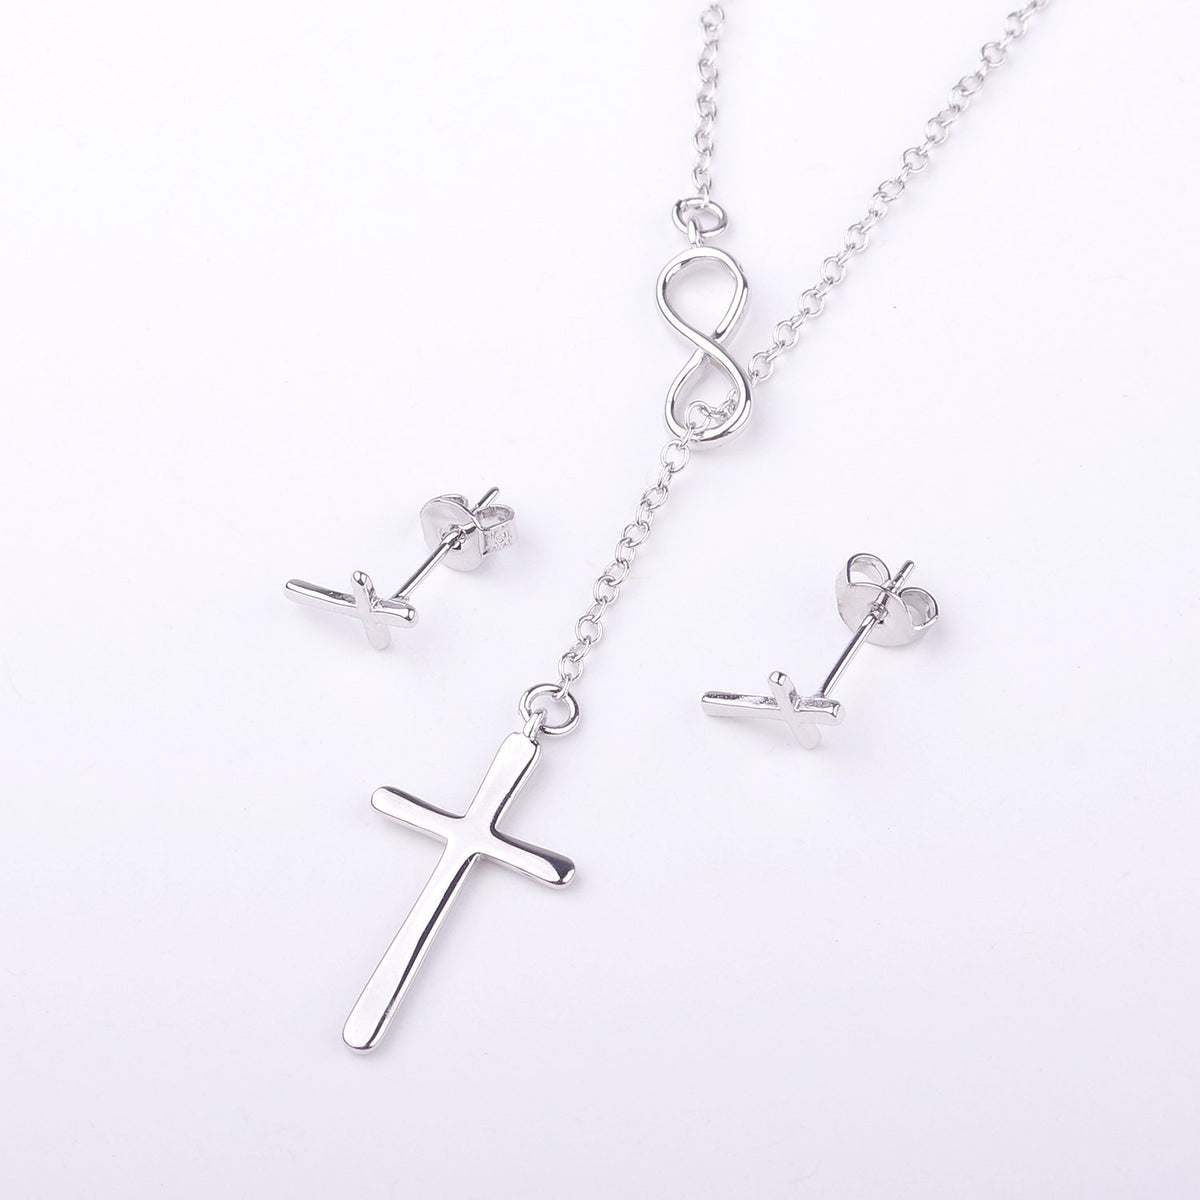 Christmas Gift for Girlfriend Cross earring and Necklace Set Jewelry Set